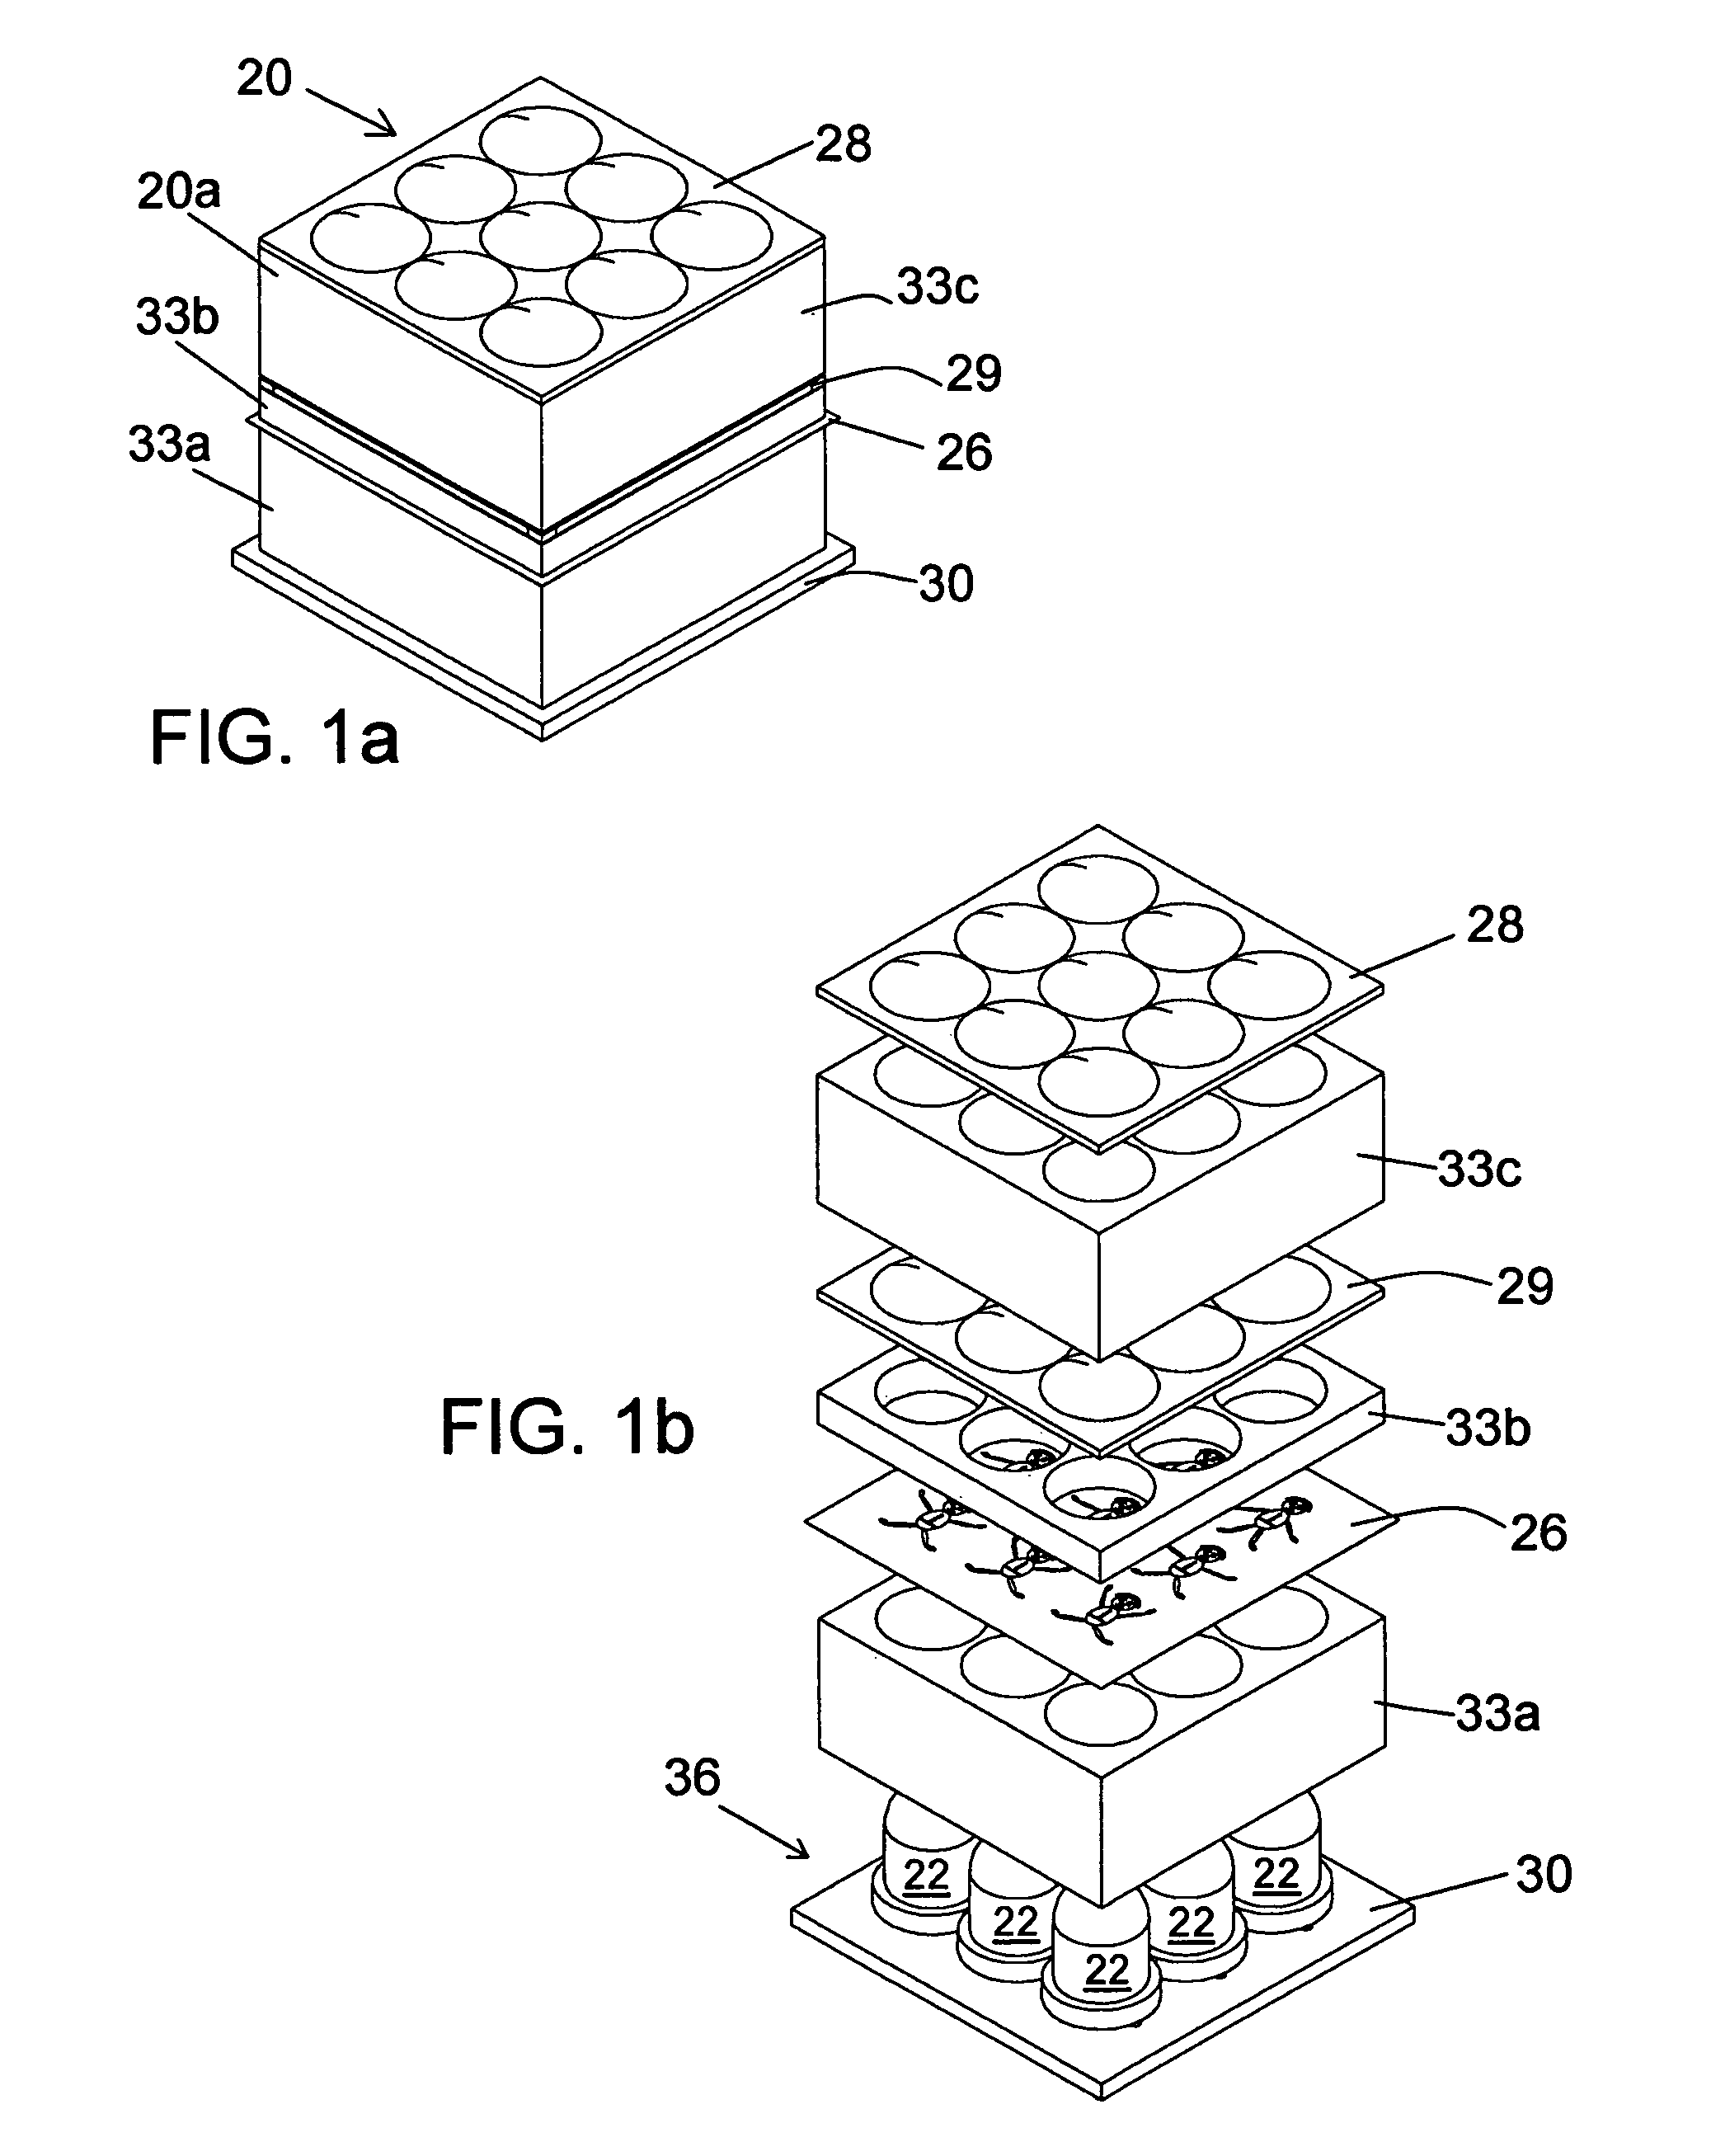 Multi-image led projector for sequentially projecting a series of transparency images onto a screen